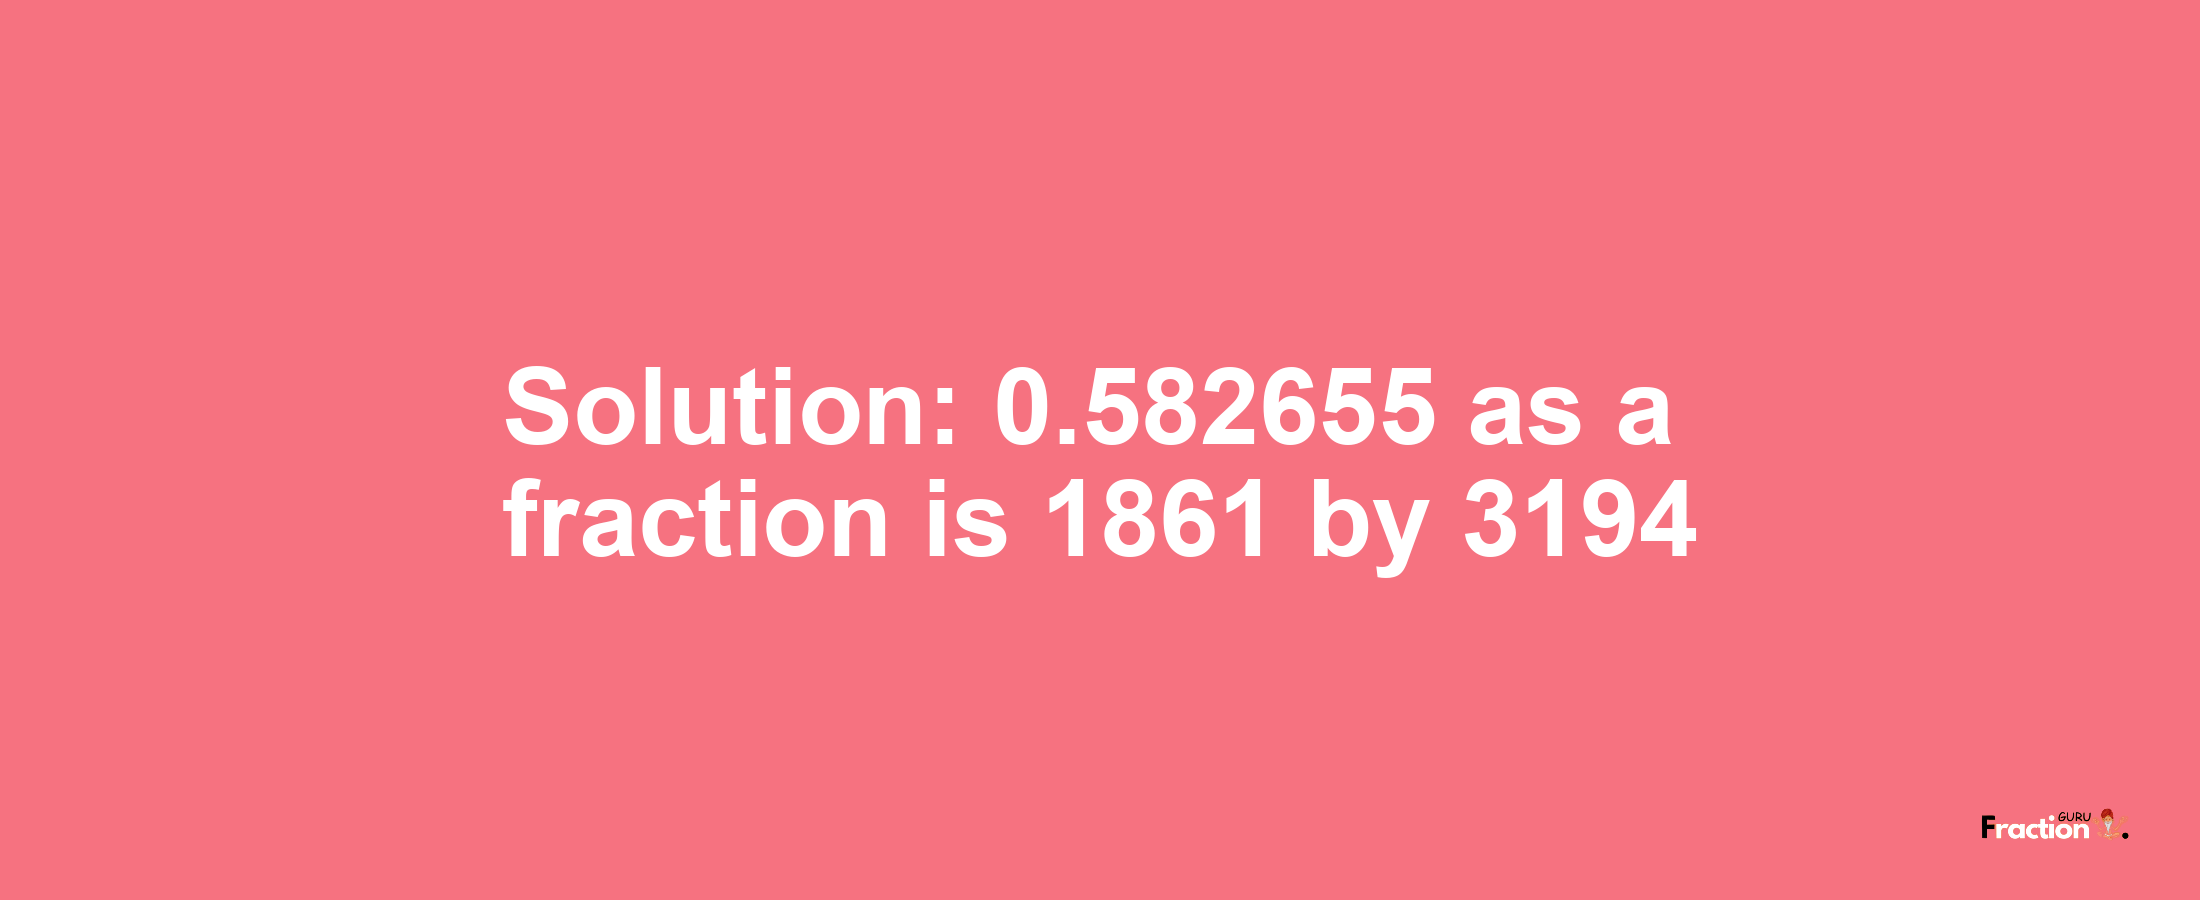 Solution:0.582655 as a fraction is 1861/3194